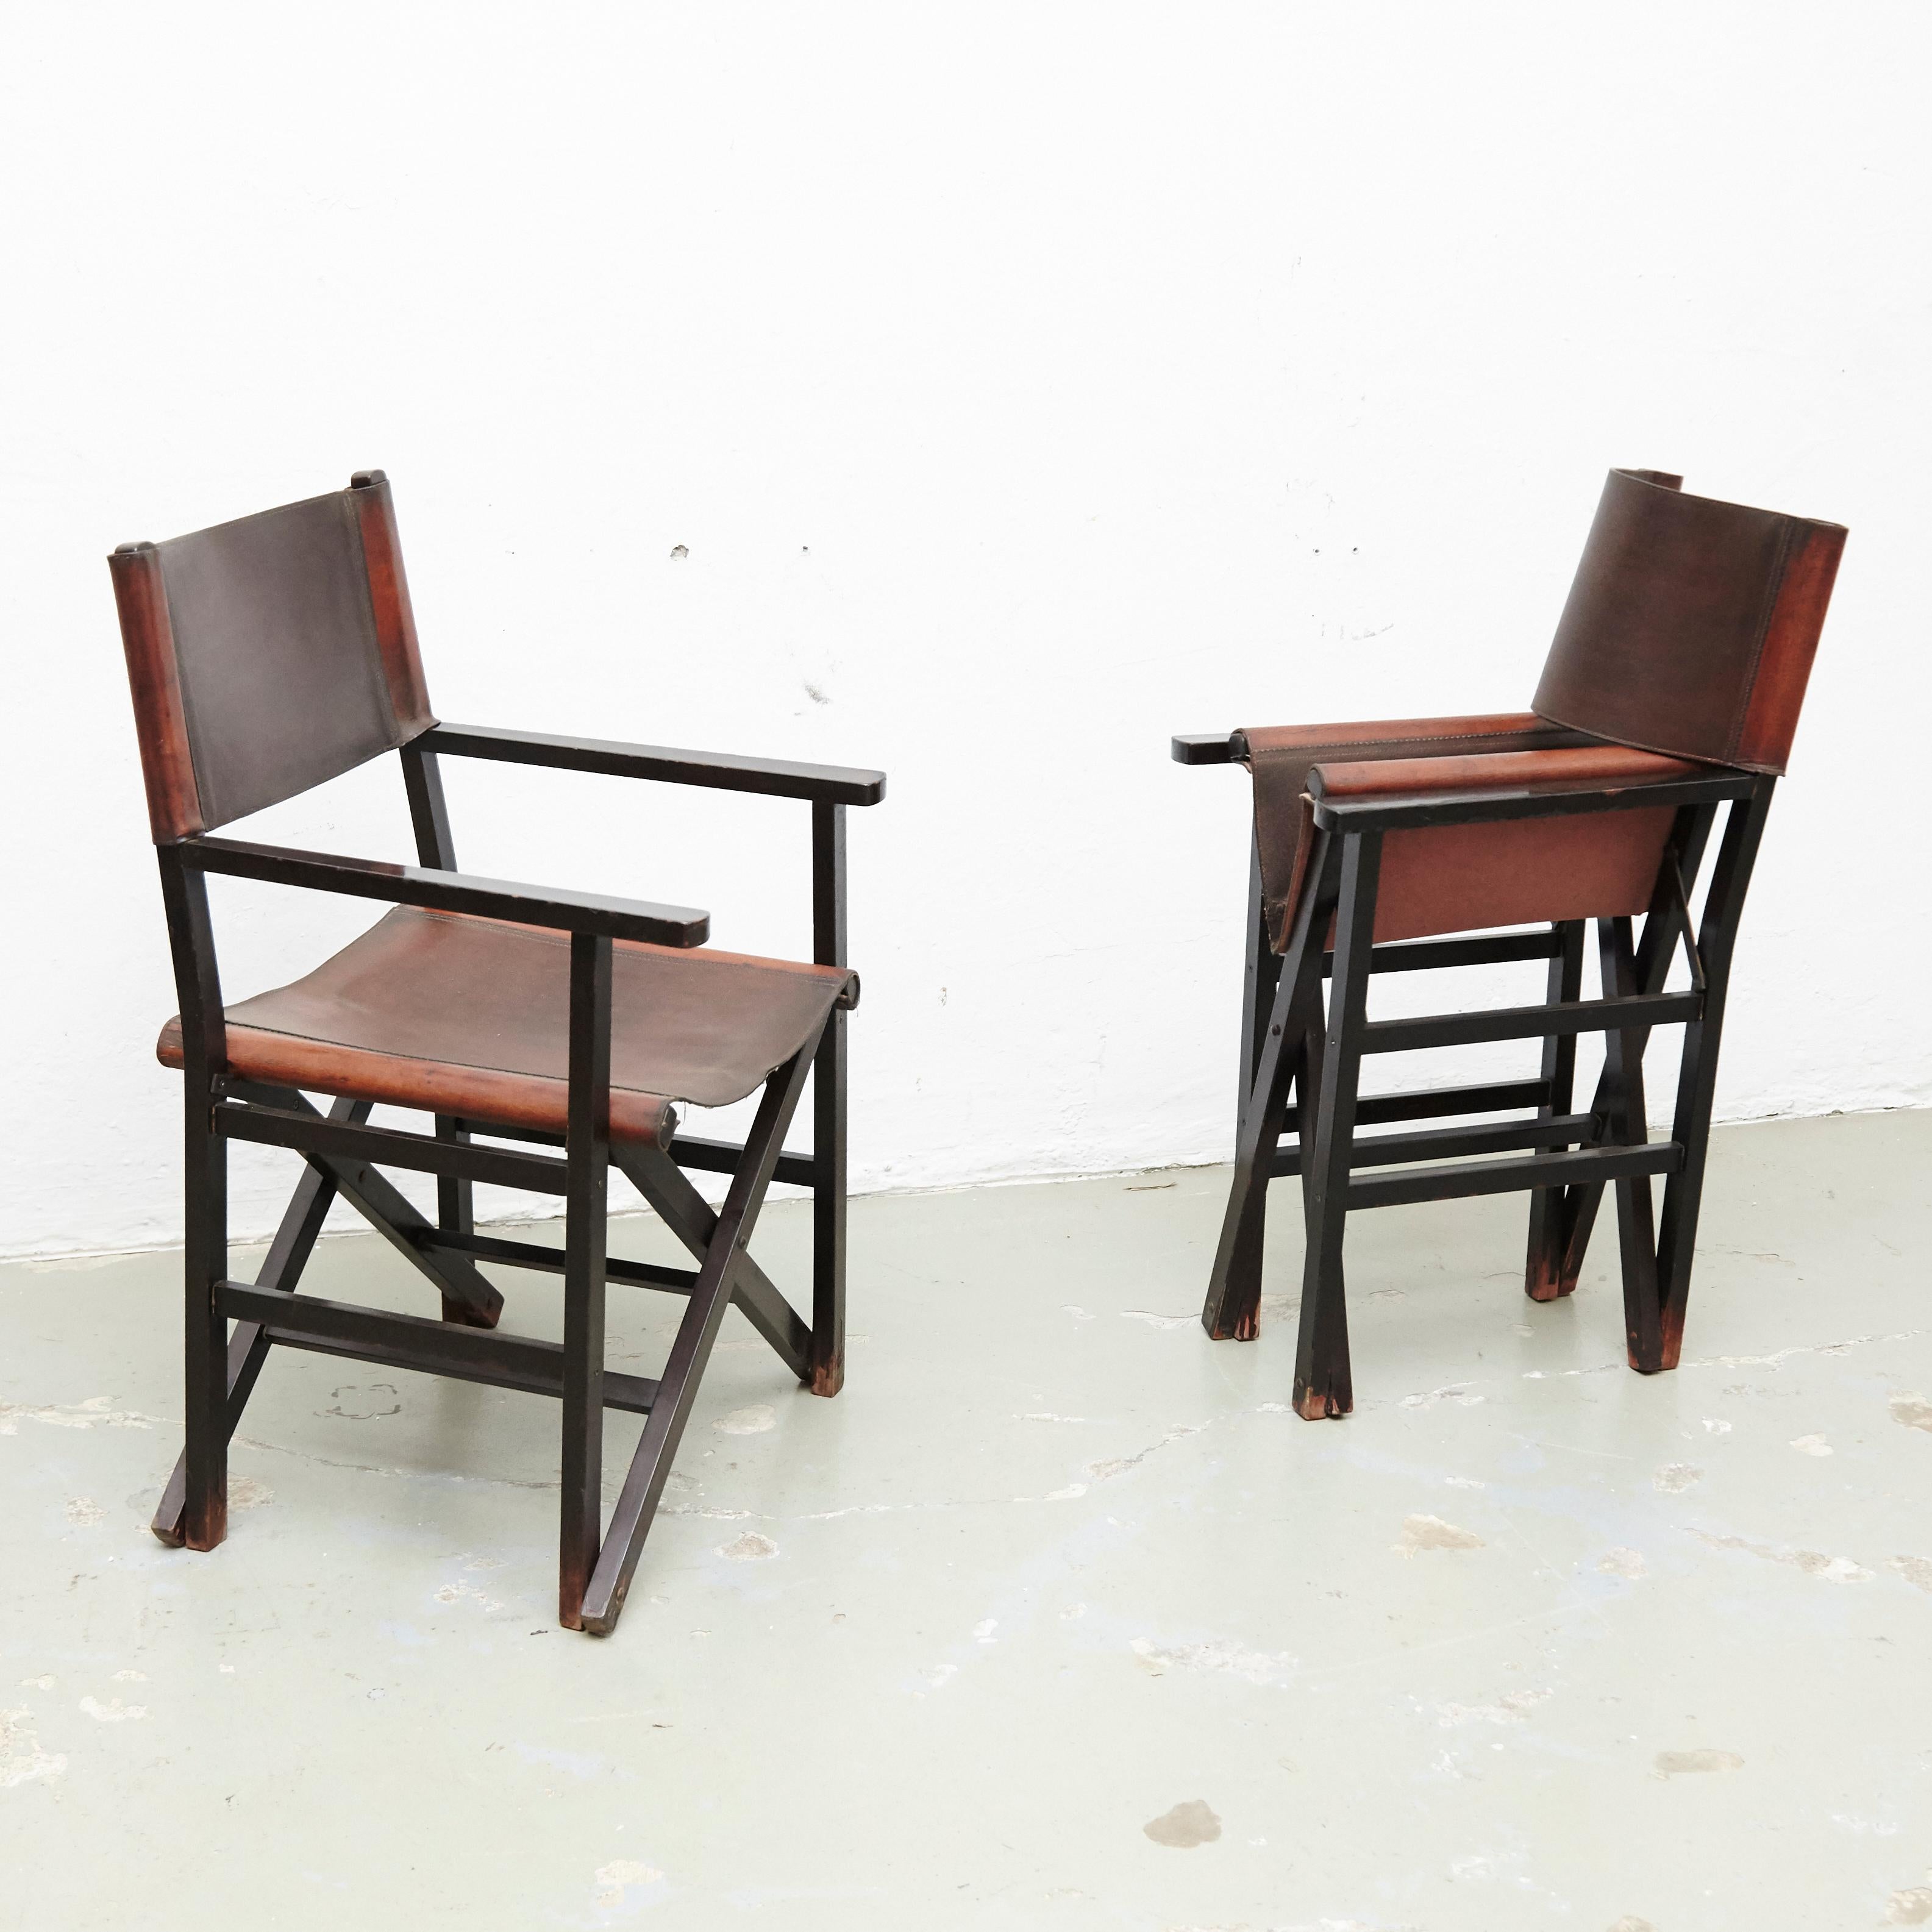 Mid-Century Modern Miguel Mila Set of 4 Leather Folding Chairs by Gres Edition, circa 1960